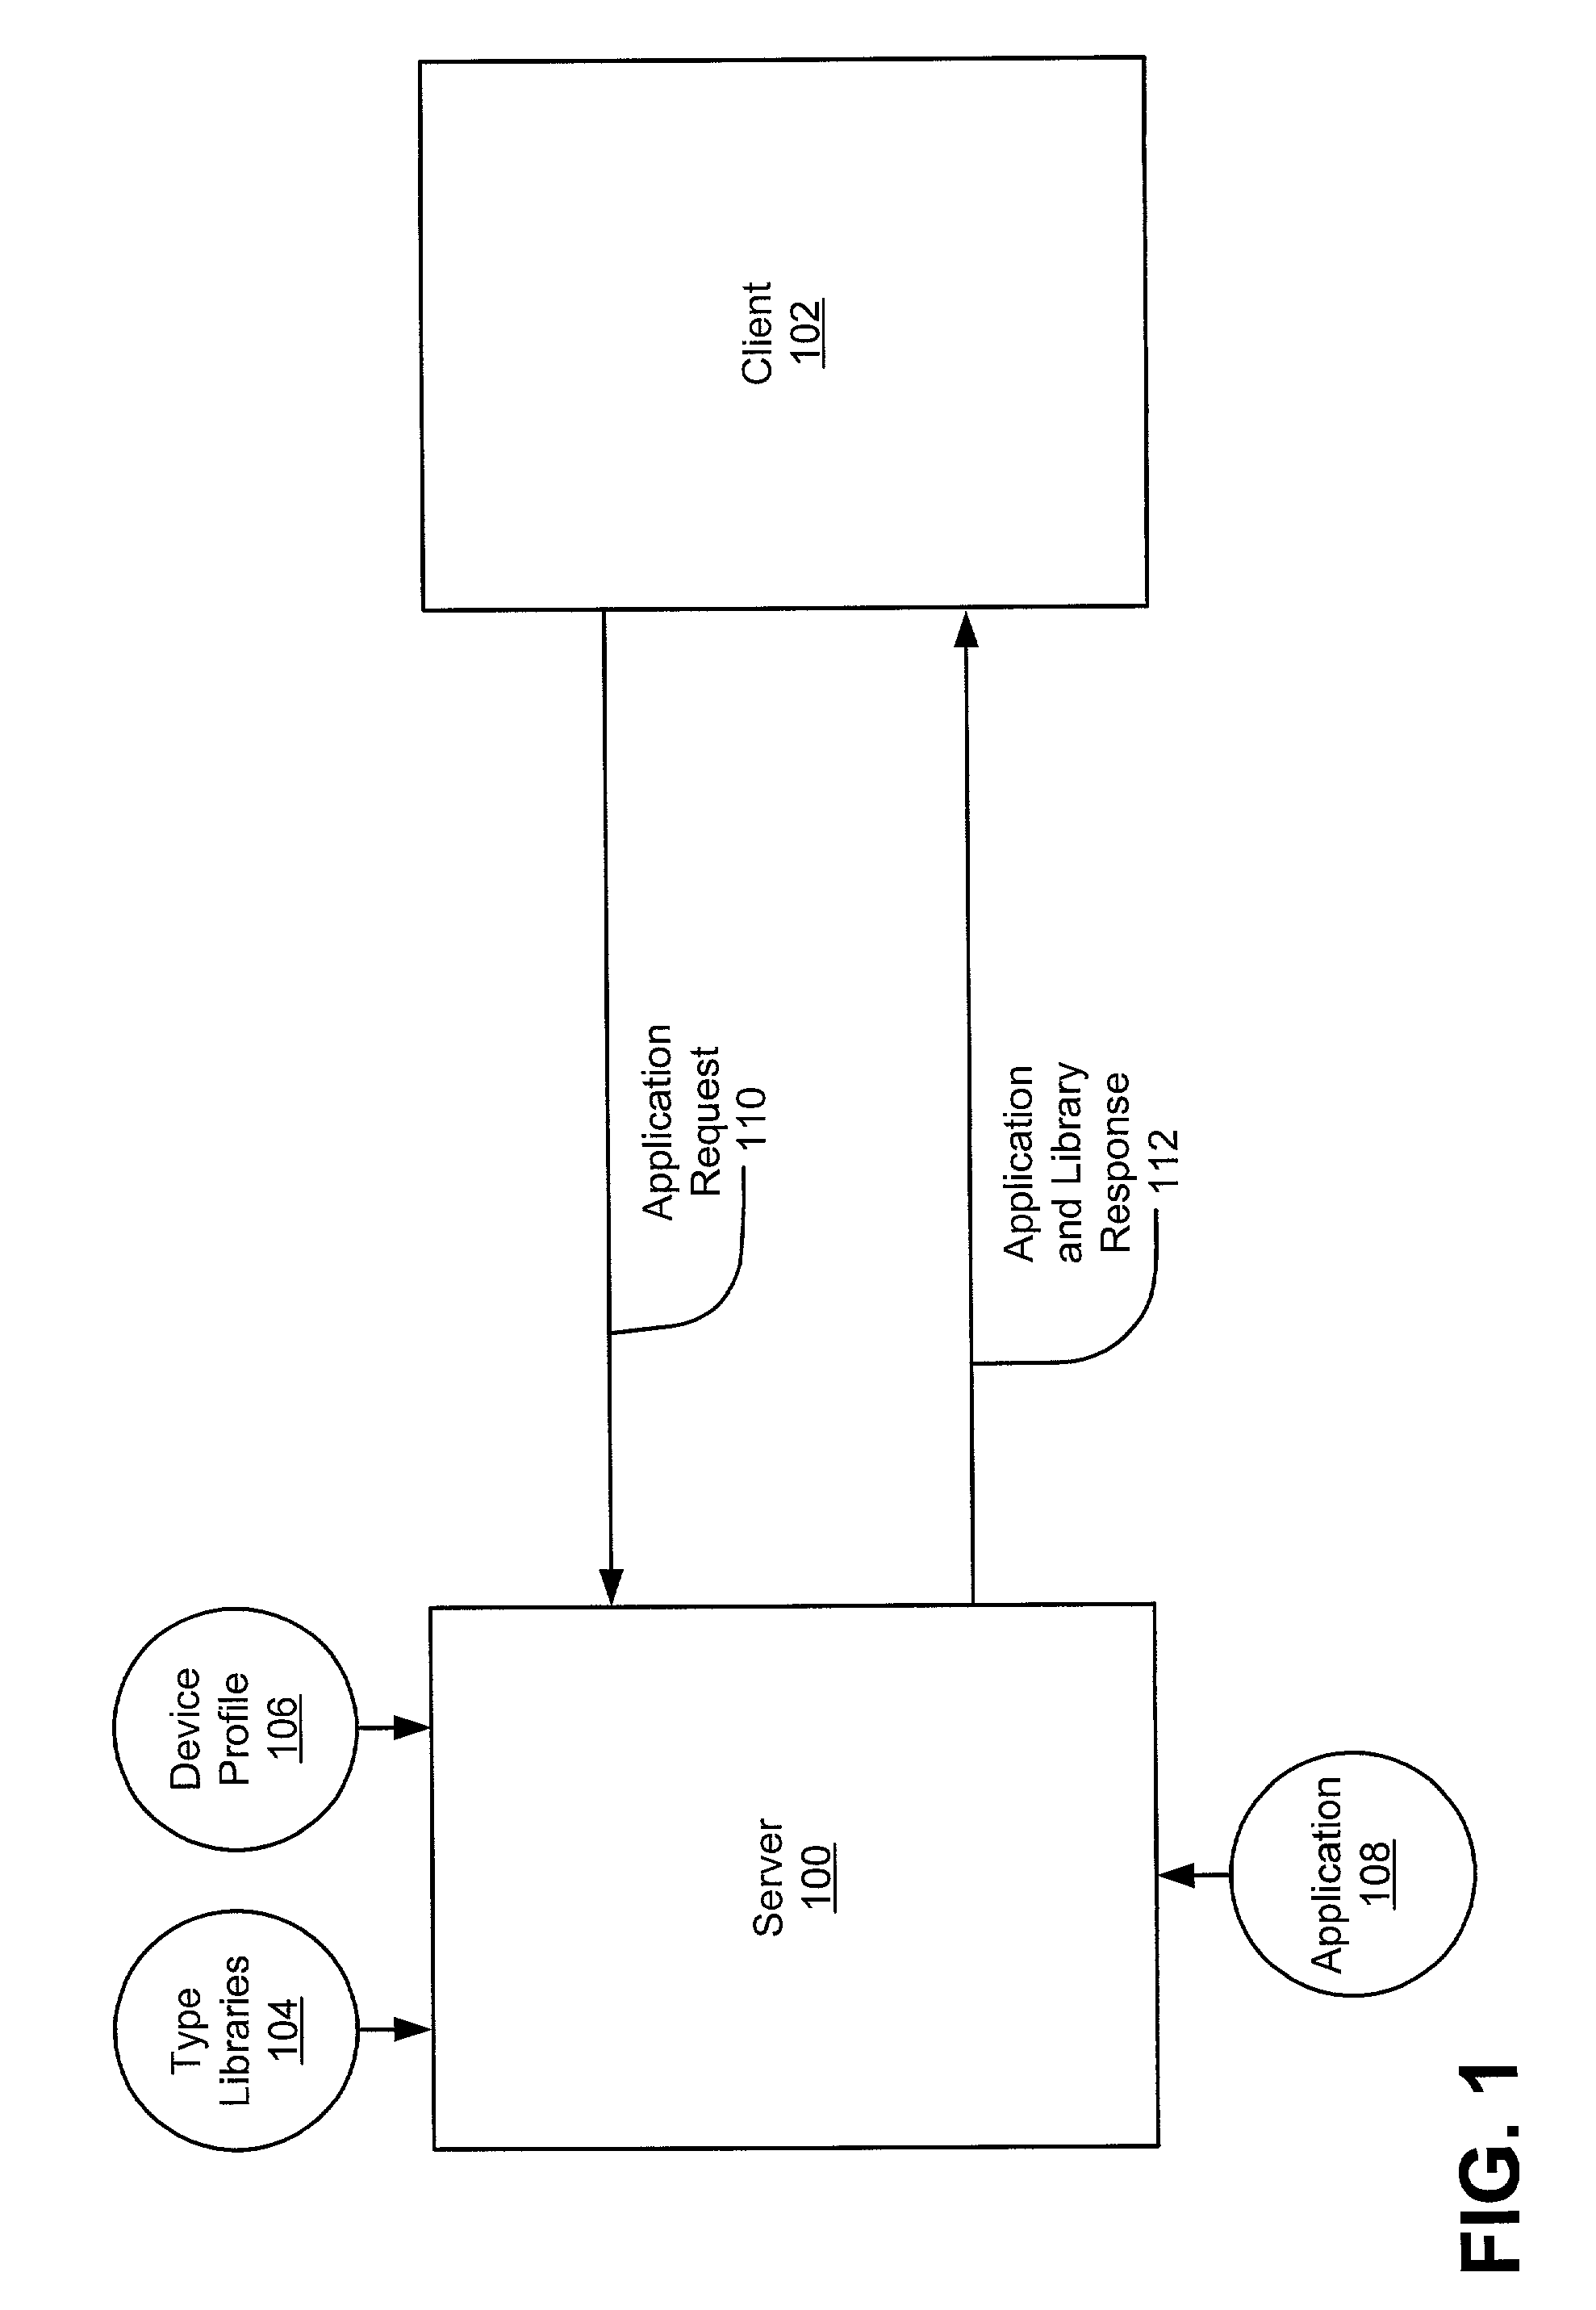 Application deflation system and method